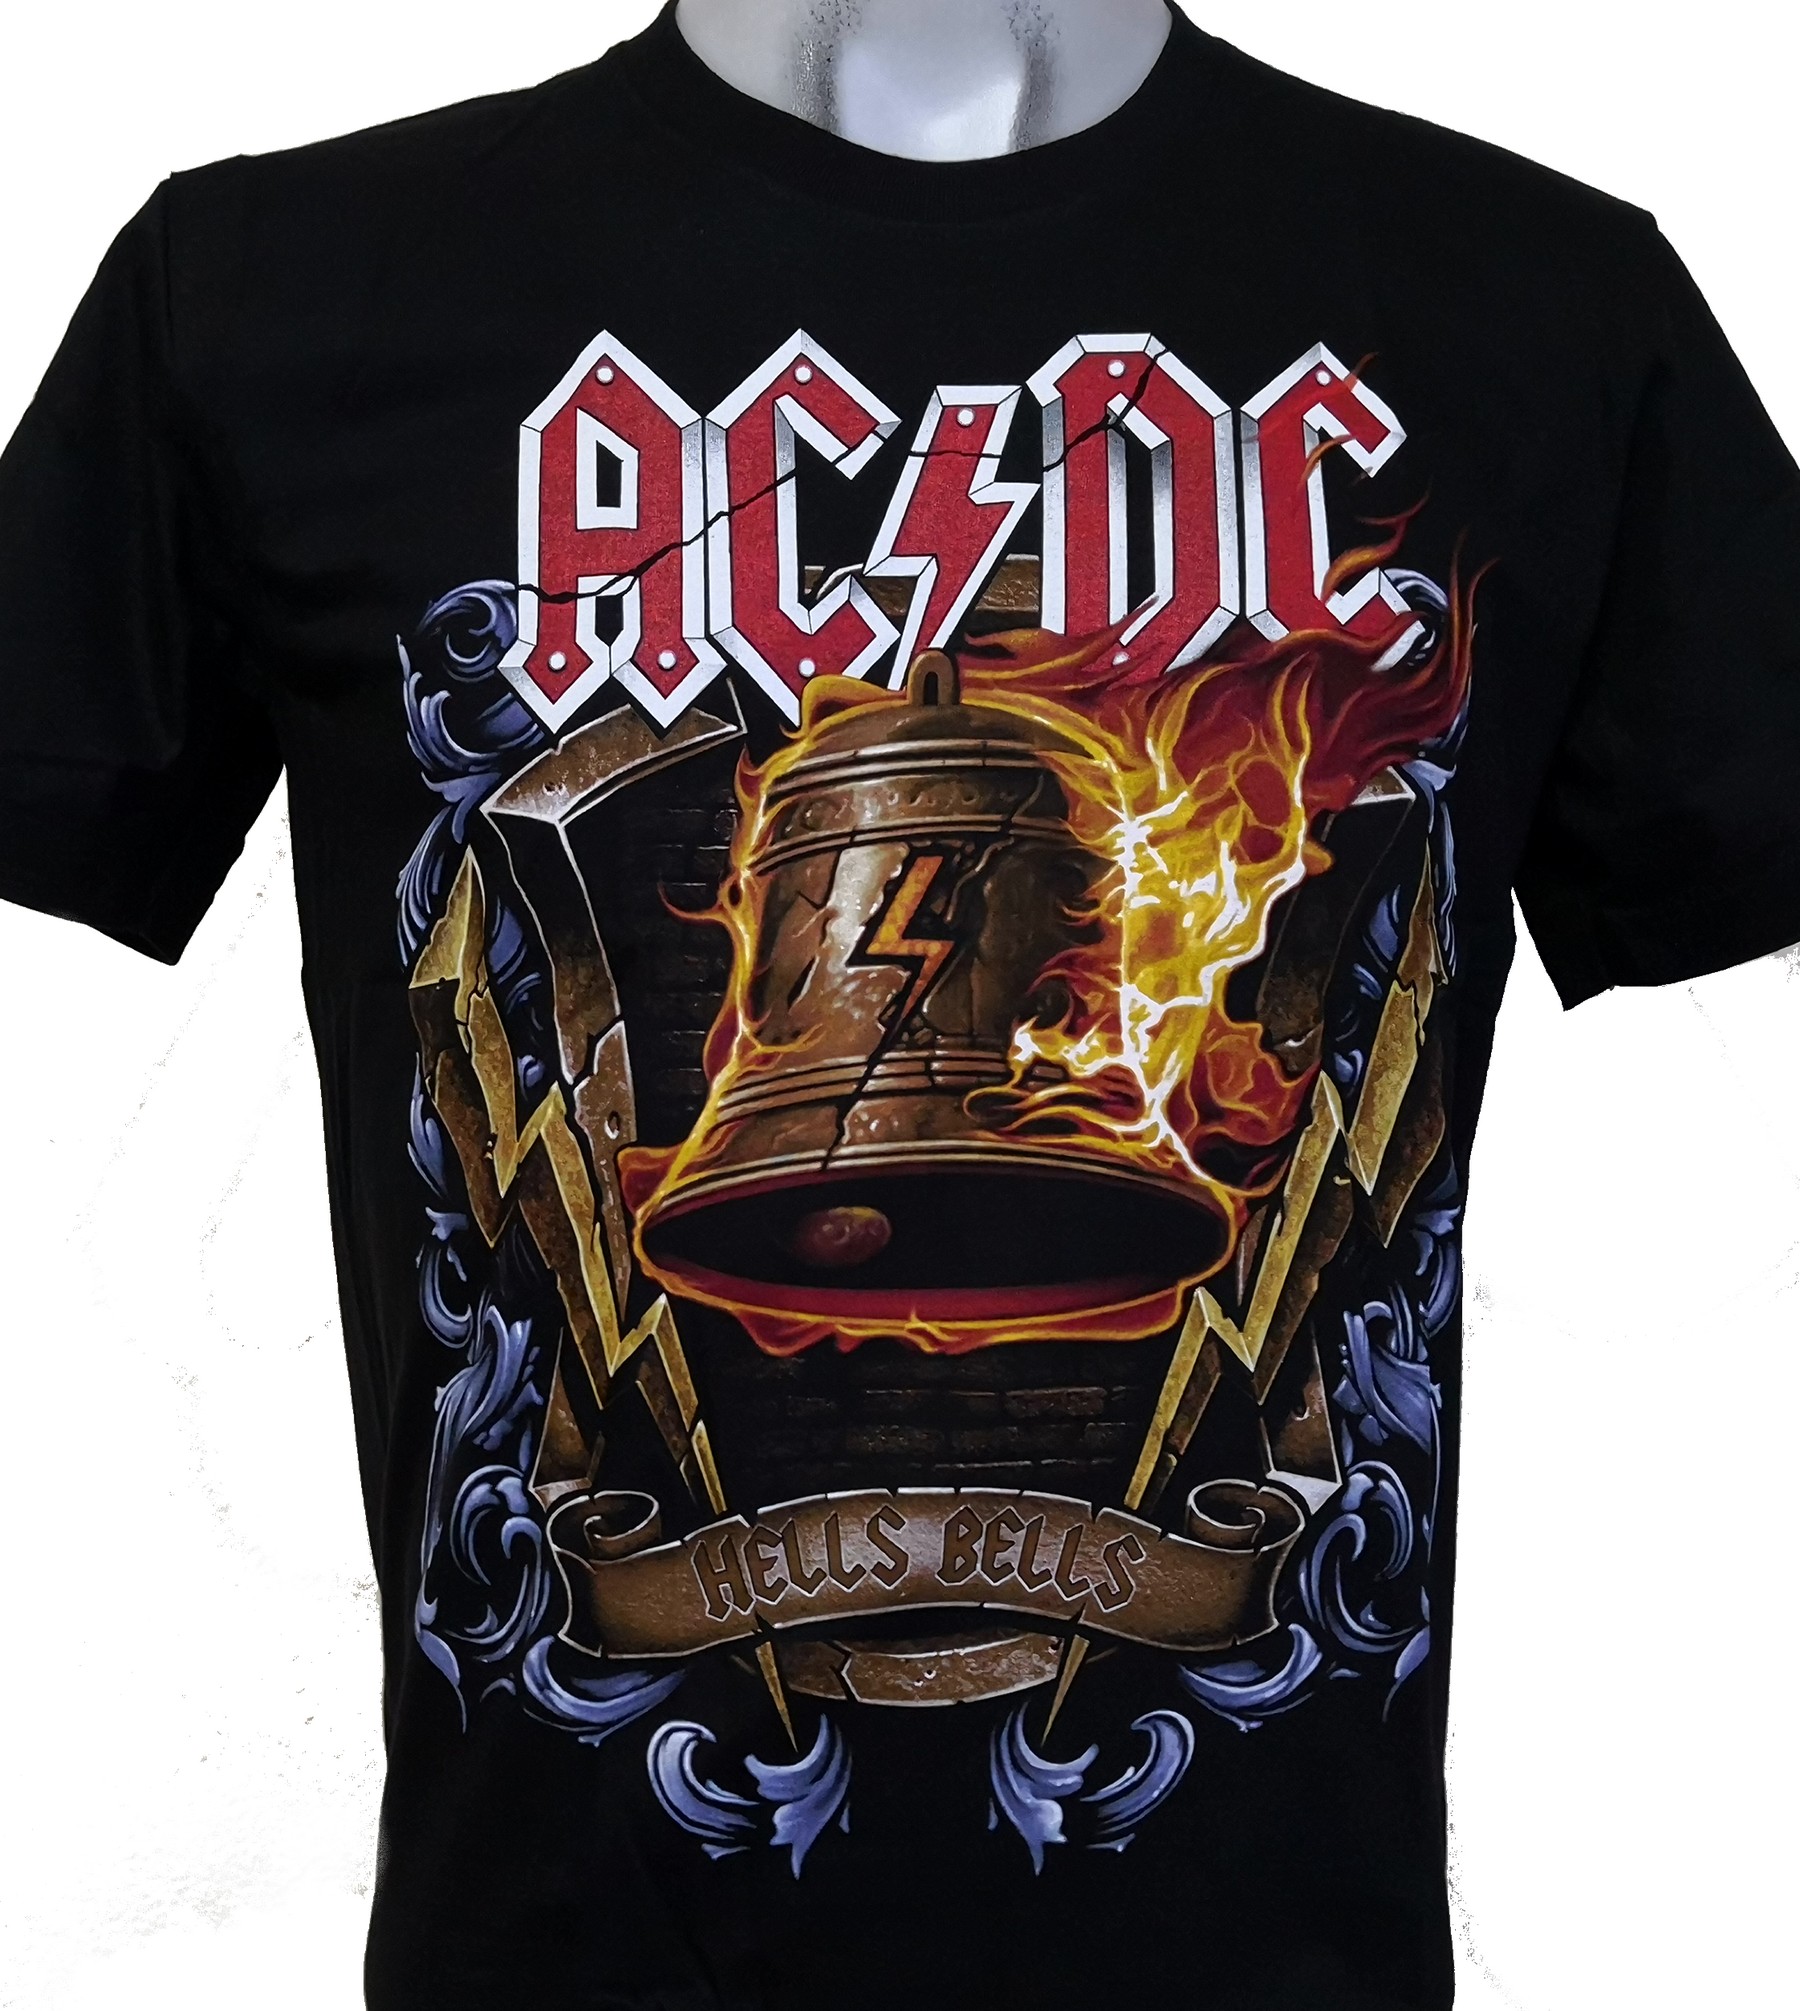 Details about   ACDC HELL'S BELLS Kids Licensed Band Tee Shirt SM-XL Boys Girls Sizes 6-20 